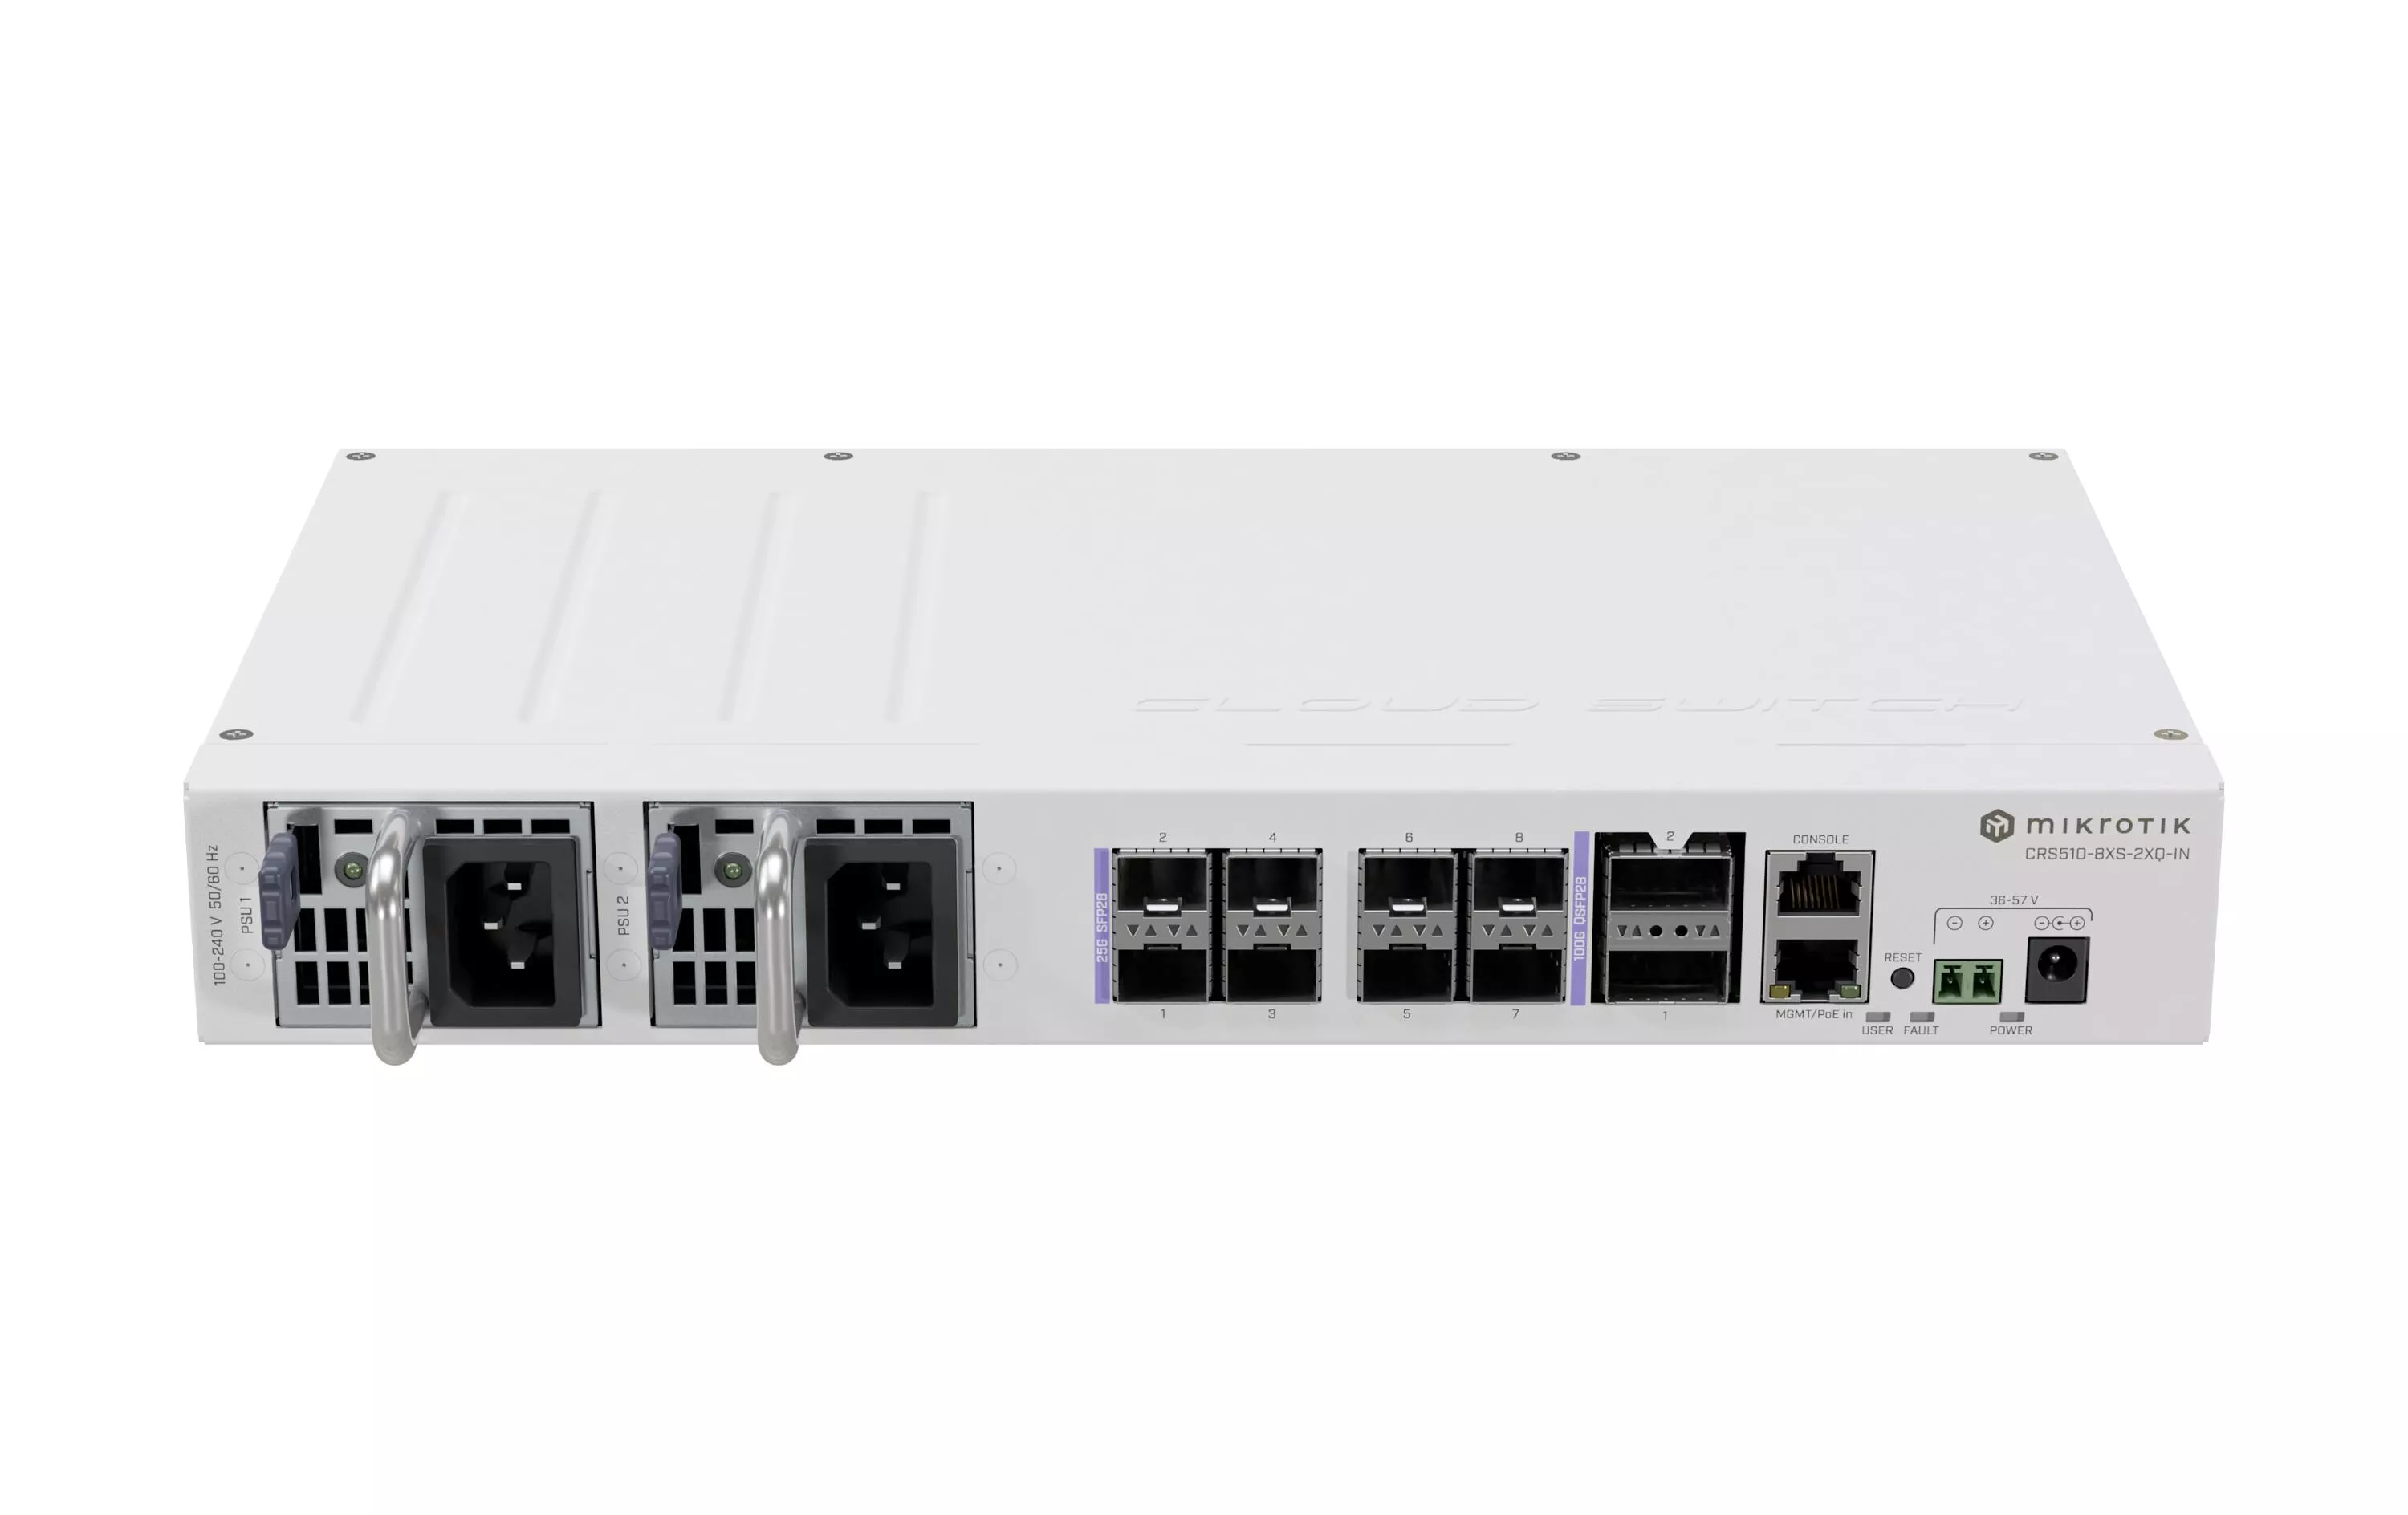 SFP28 Switch CRS510-8XS-2XQ-IN 10 Port